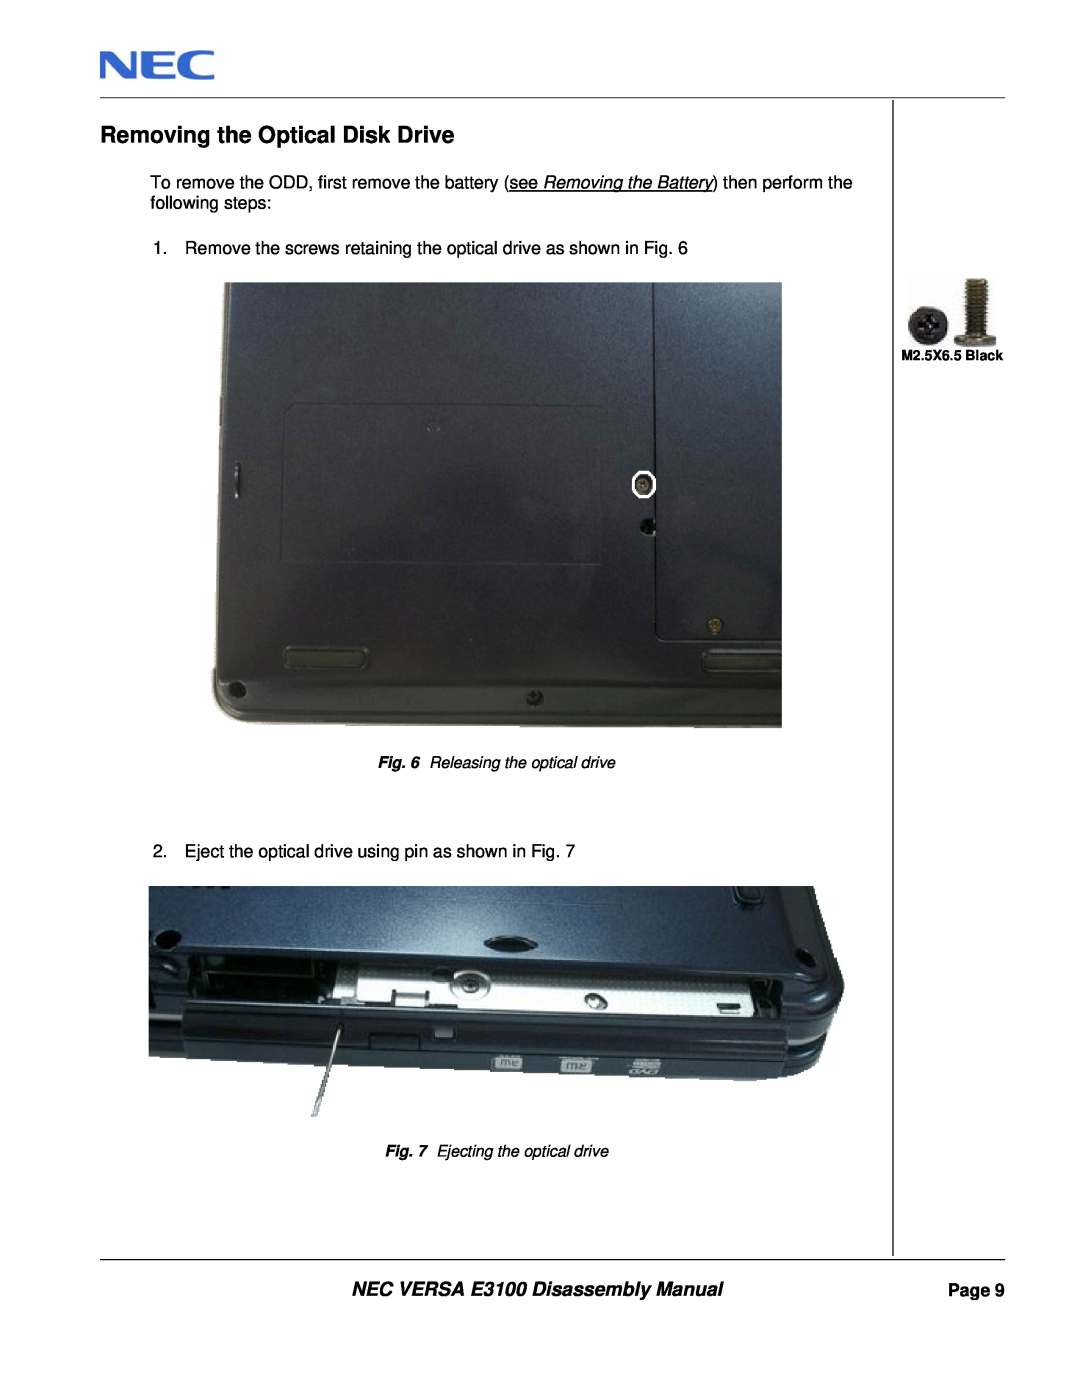 NEC manual Removing the Optical Disk Drive, NEC VERSA E3100 Disassembly Manual, Releasing the optical drive 